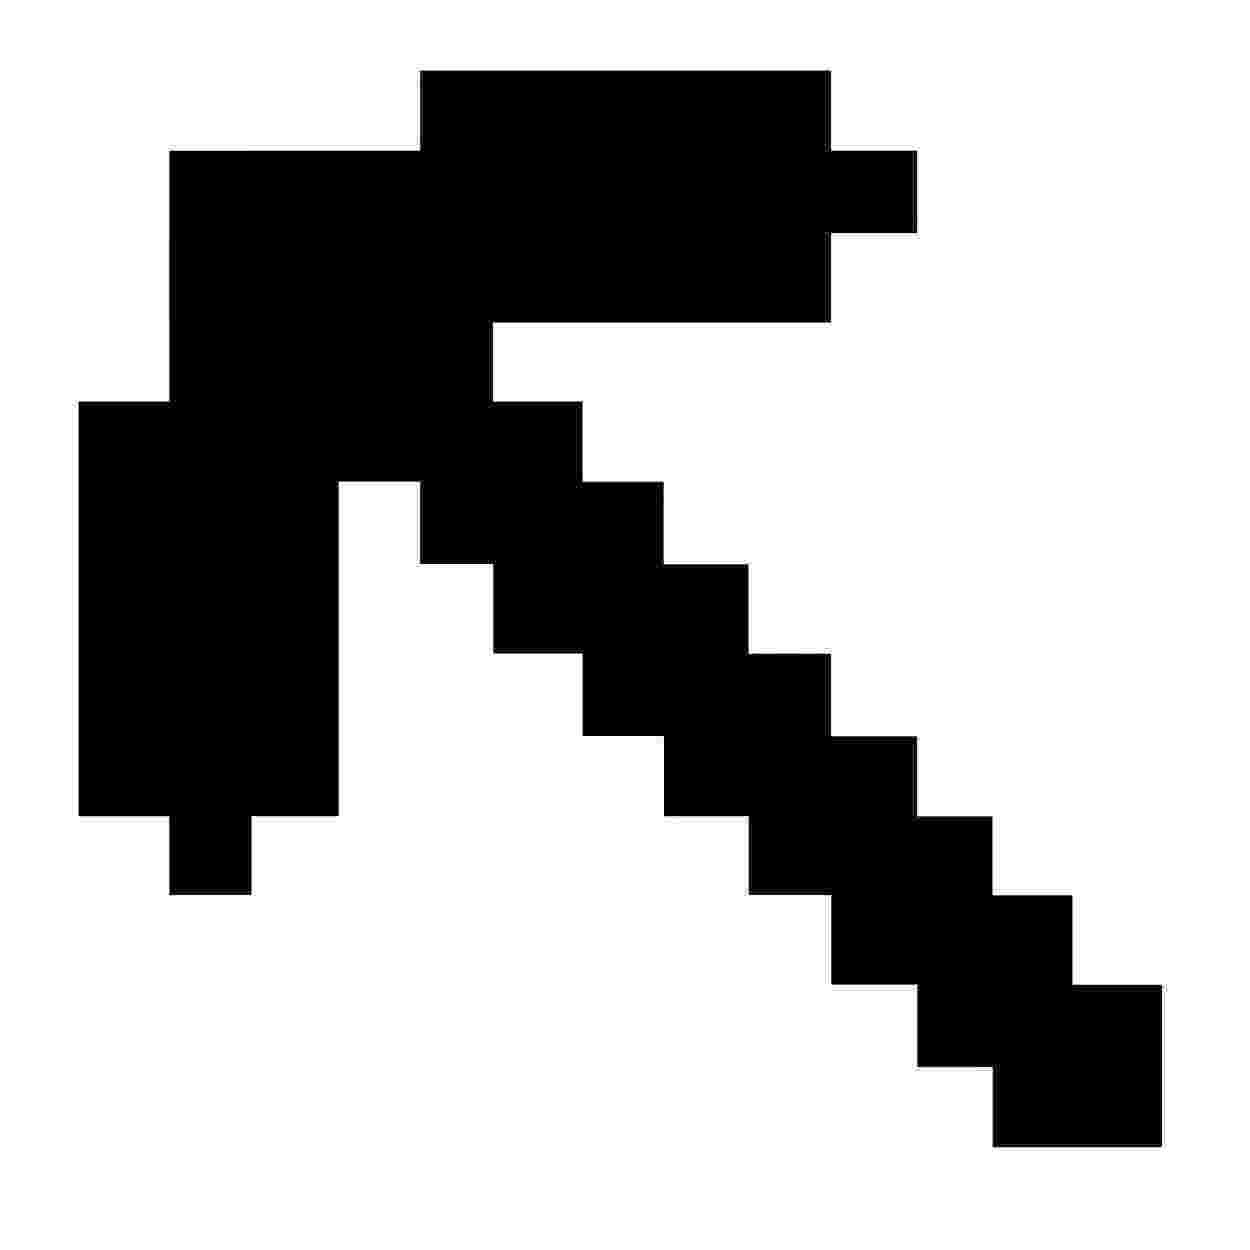 minecraft black and white pictures black and white pixel art template google search knots and black white minecraft pictures 